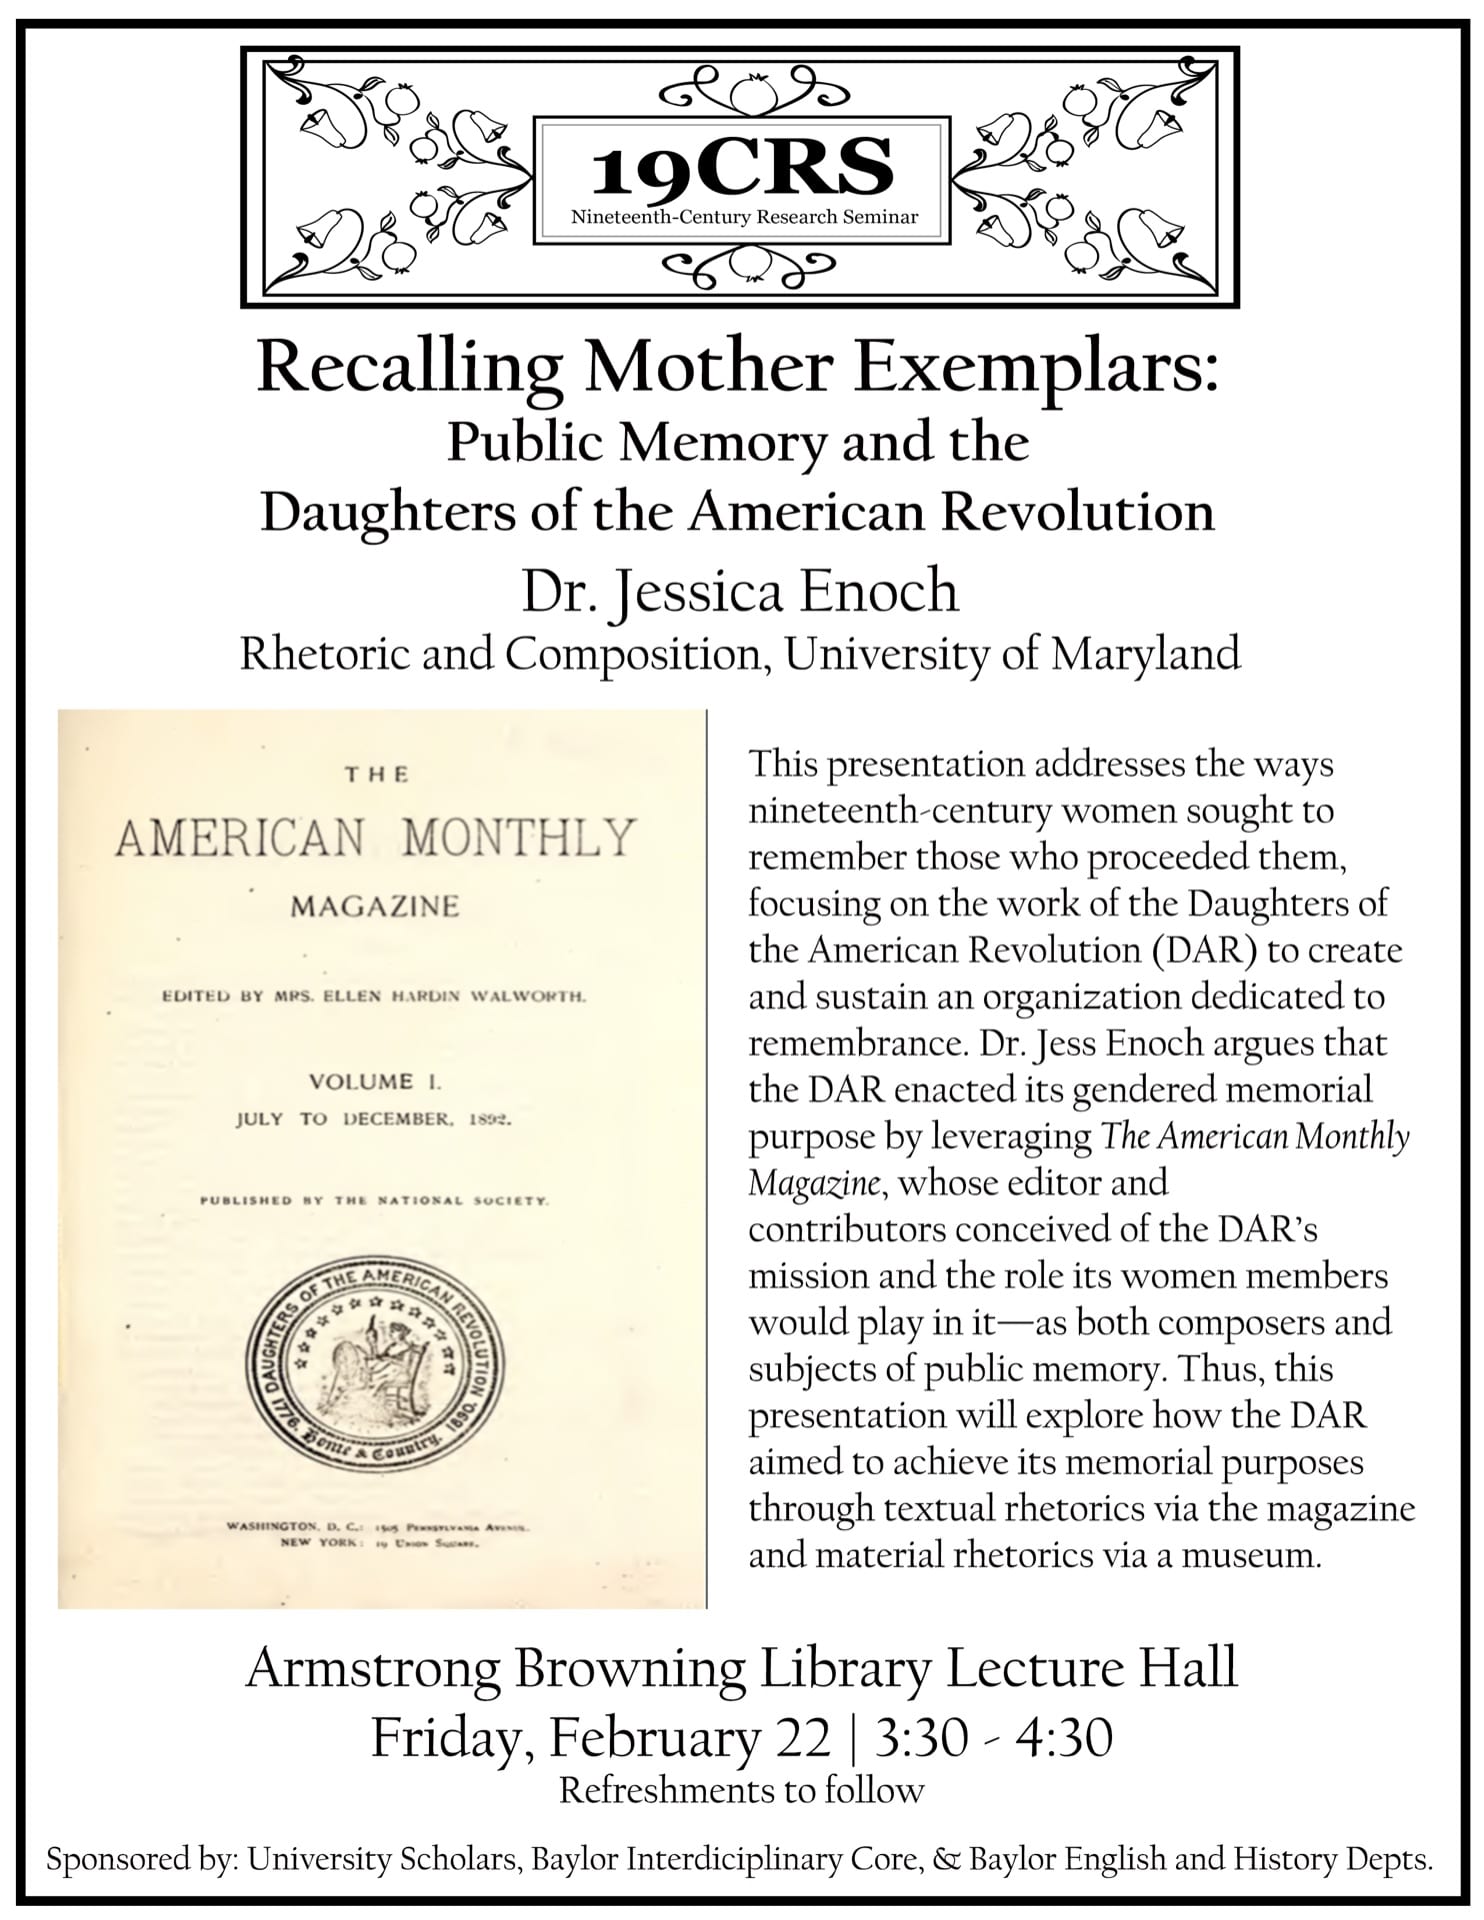 Flyer for Jess Enoch's talk. It includes an image of a title page from American Monthly Magazine.